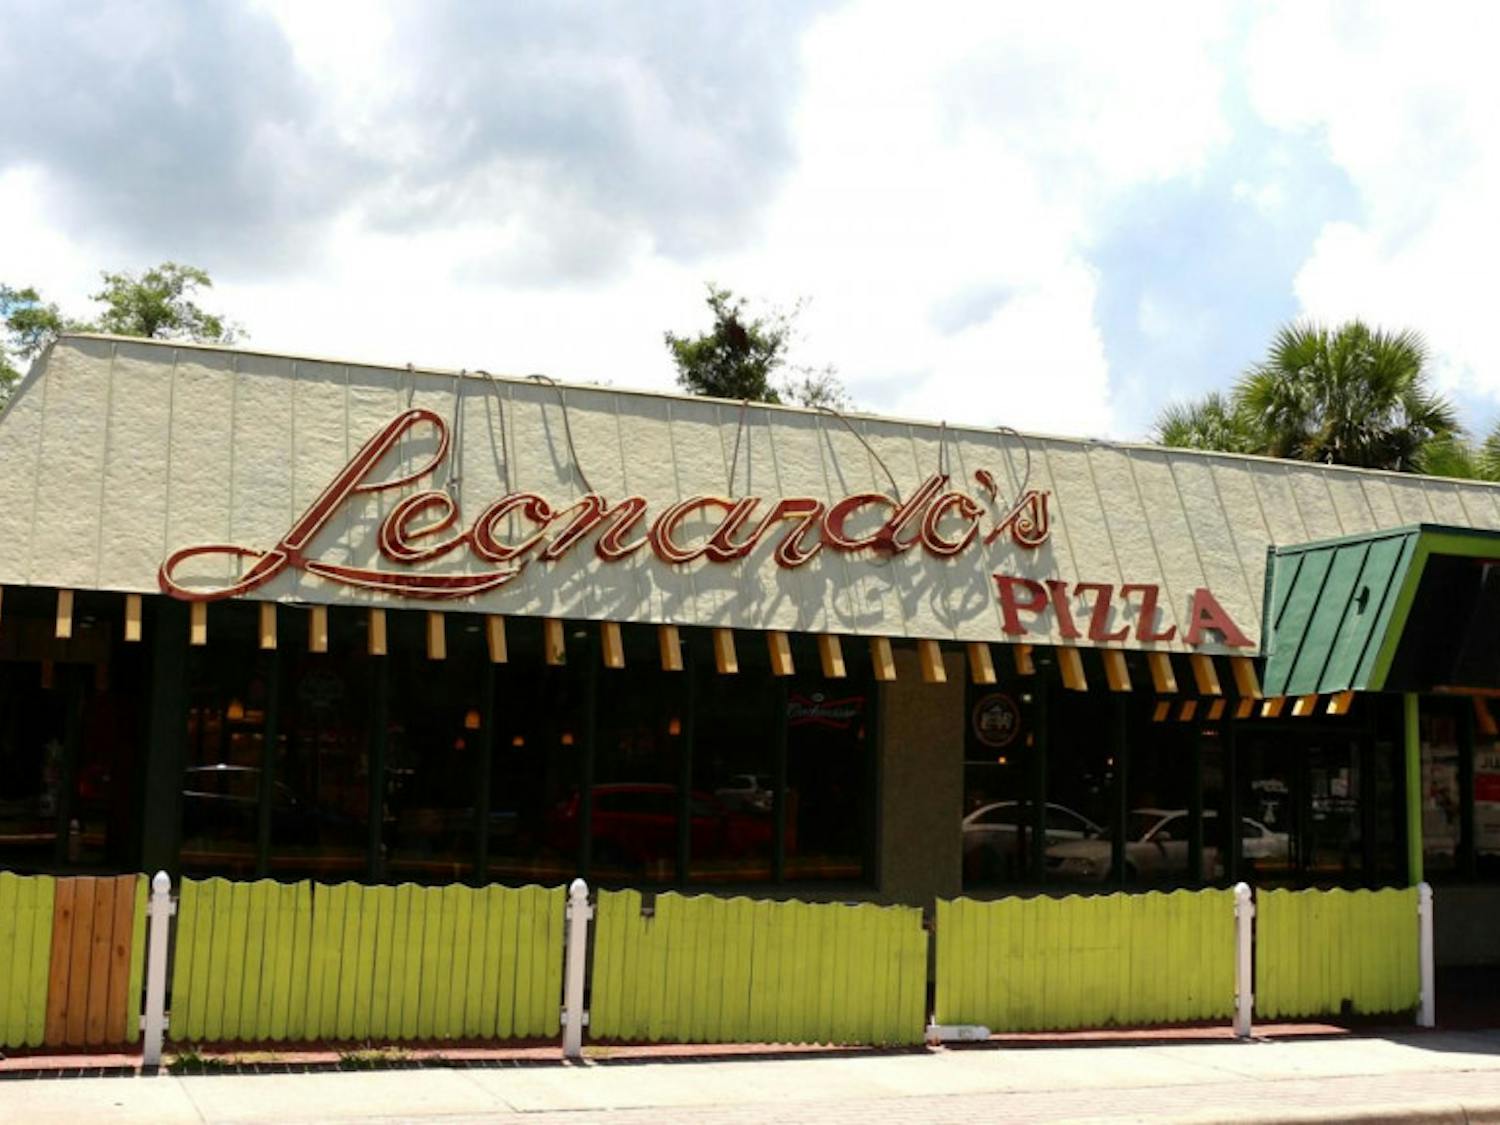 After 46 years, Leonardo’s By The Slice is a staple of Gainesville culture.